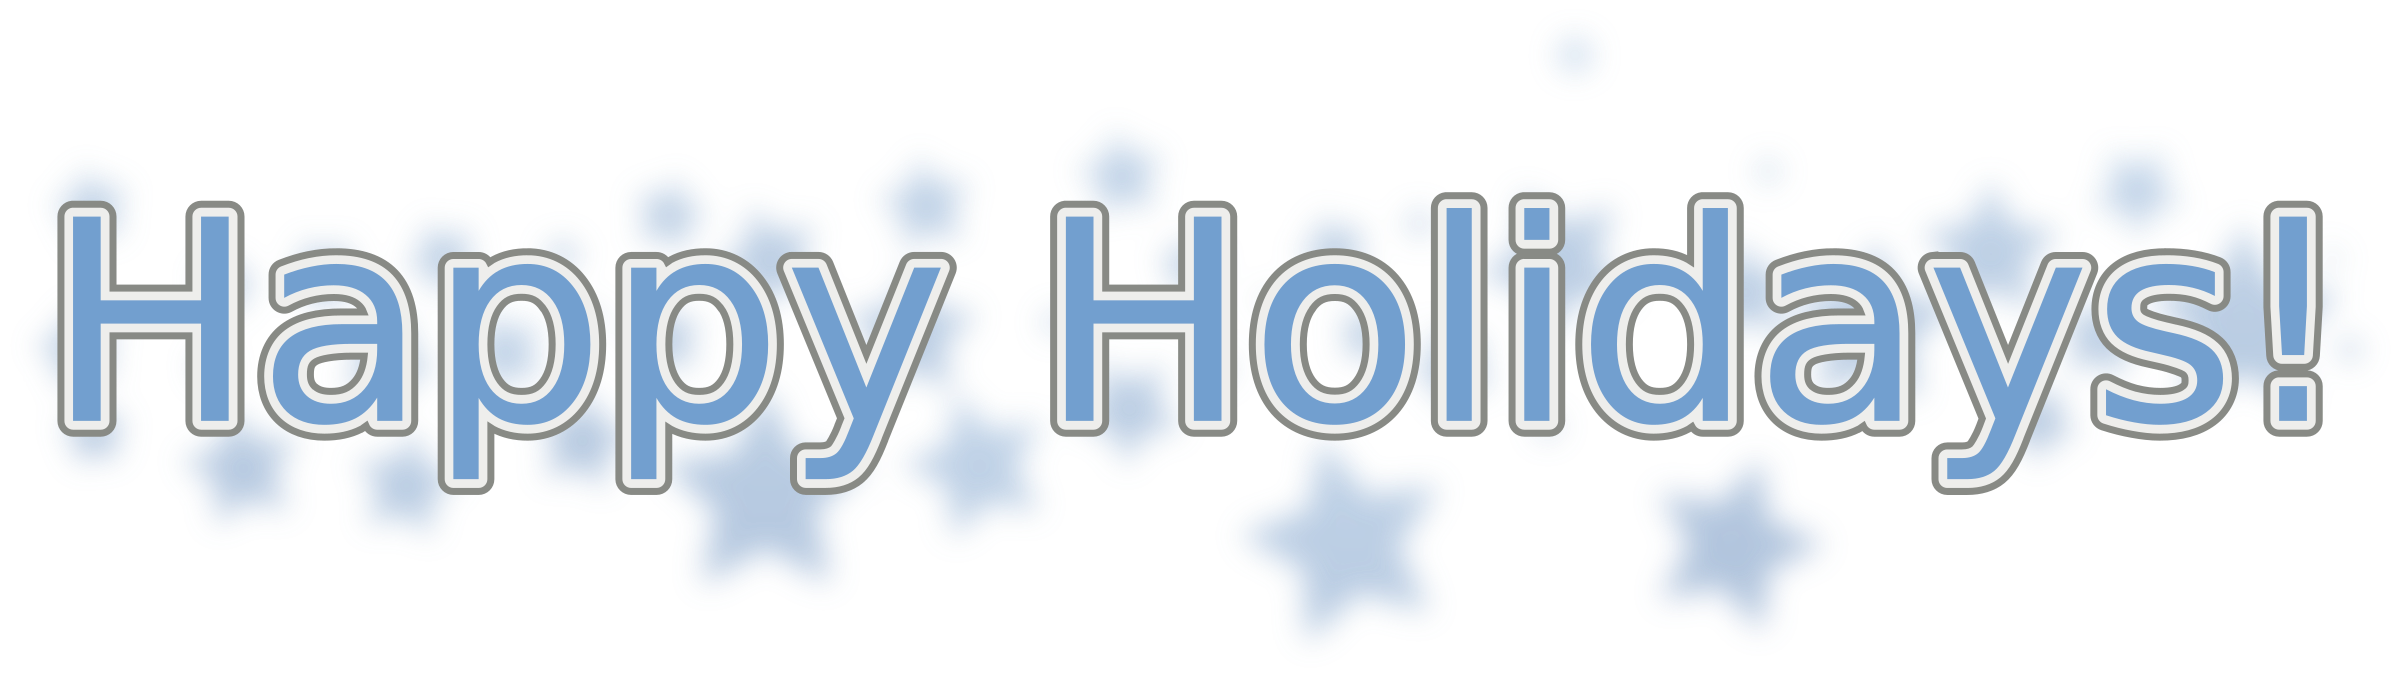 Happy Holidays PNG HD Quality